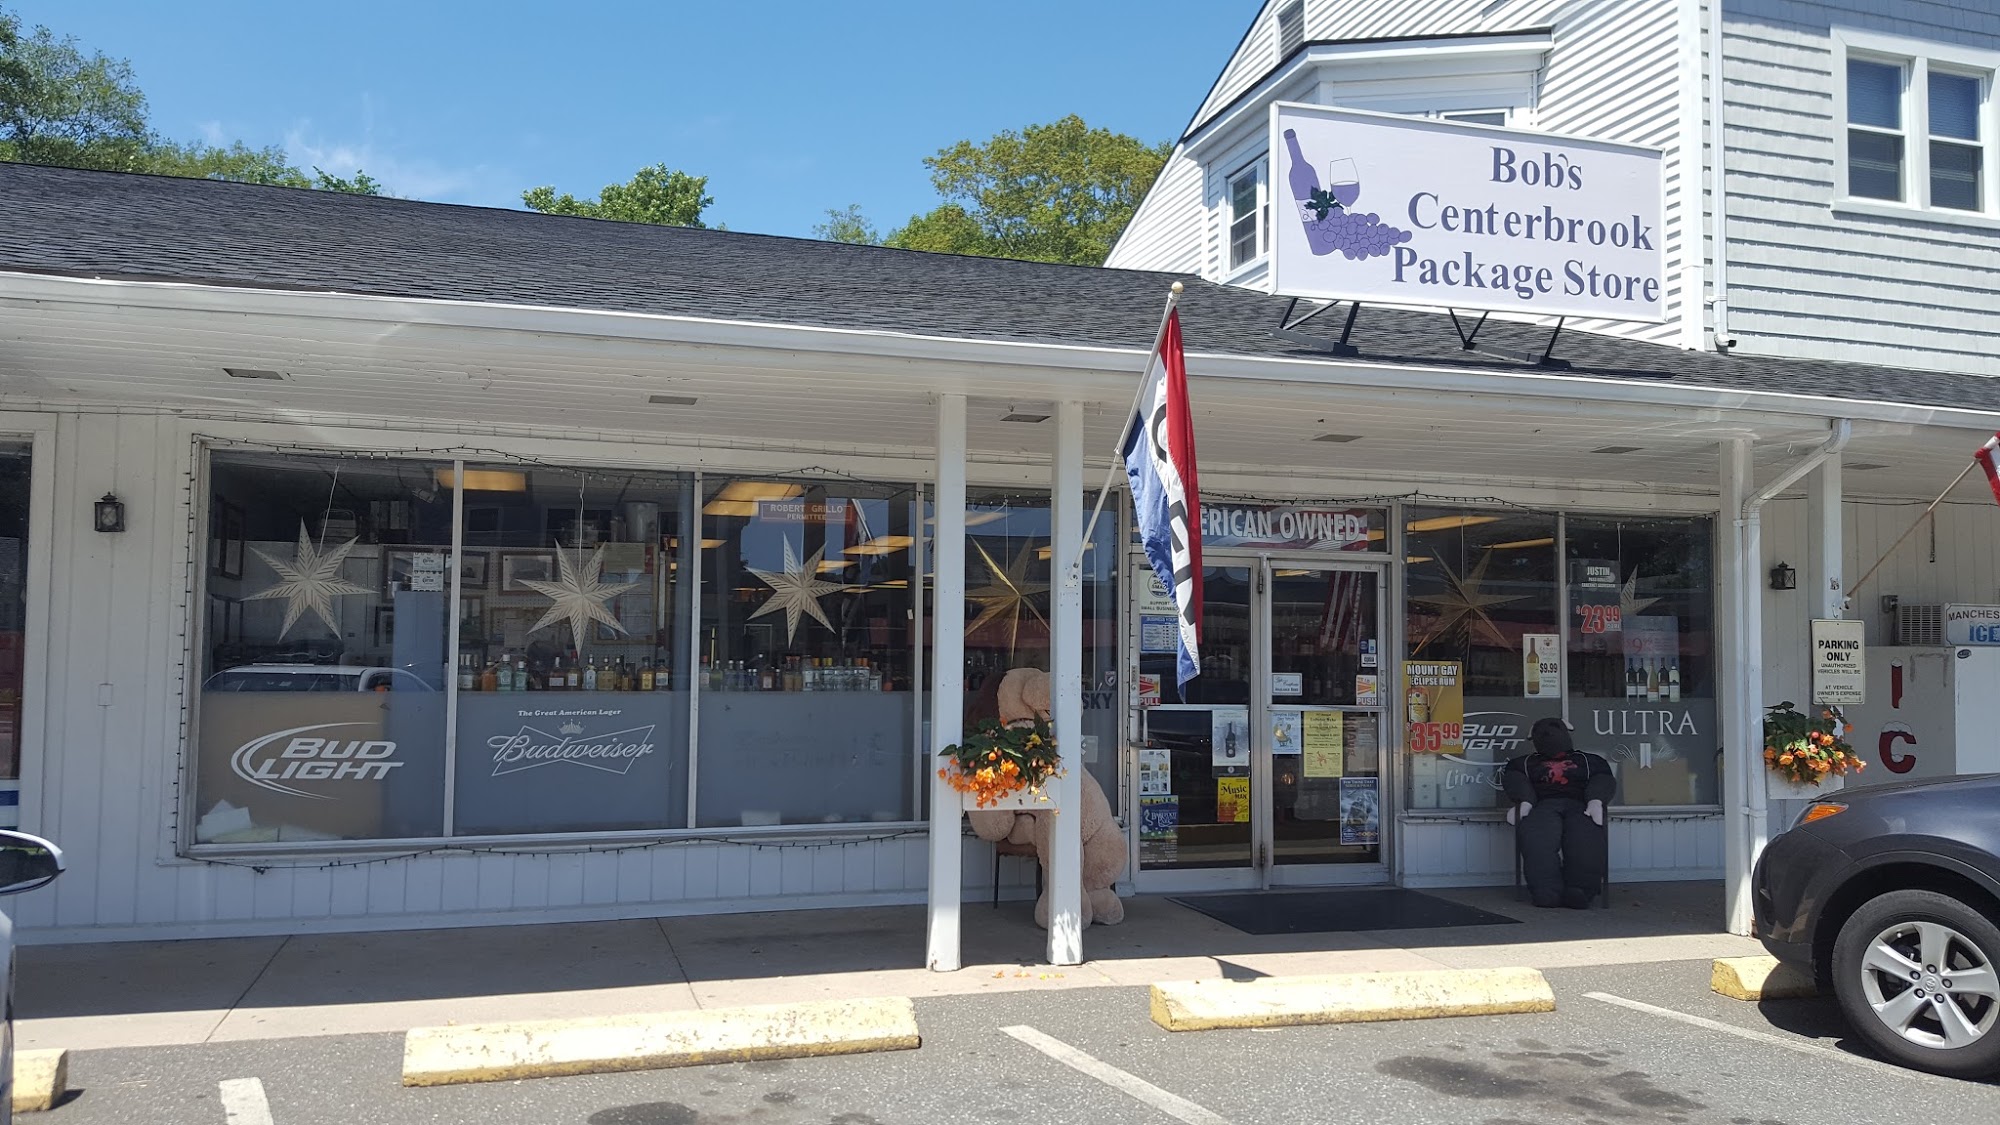 Bob's Centerbrook Package Store